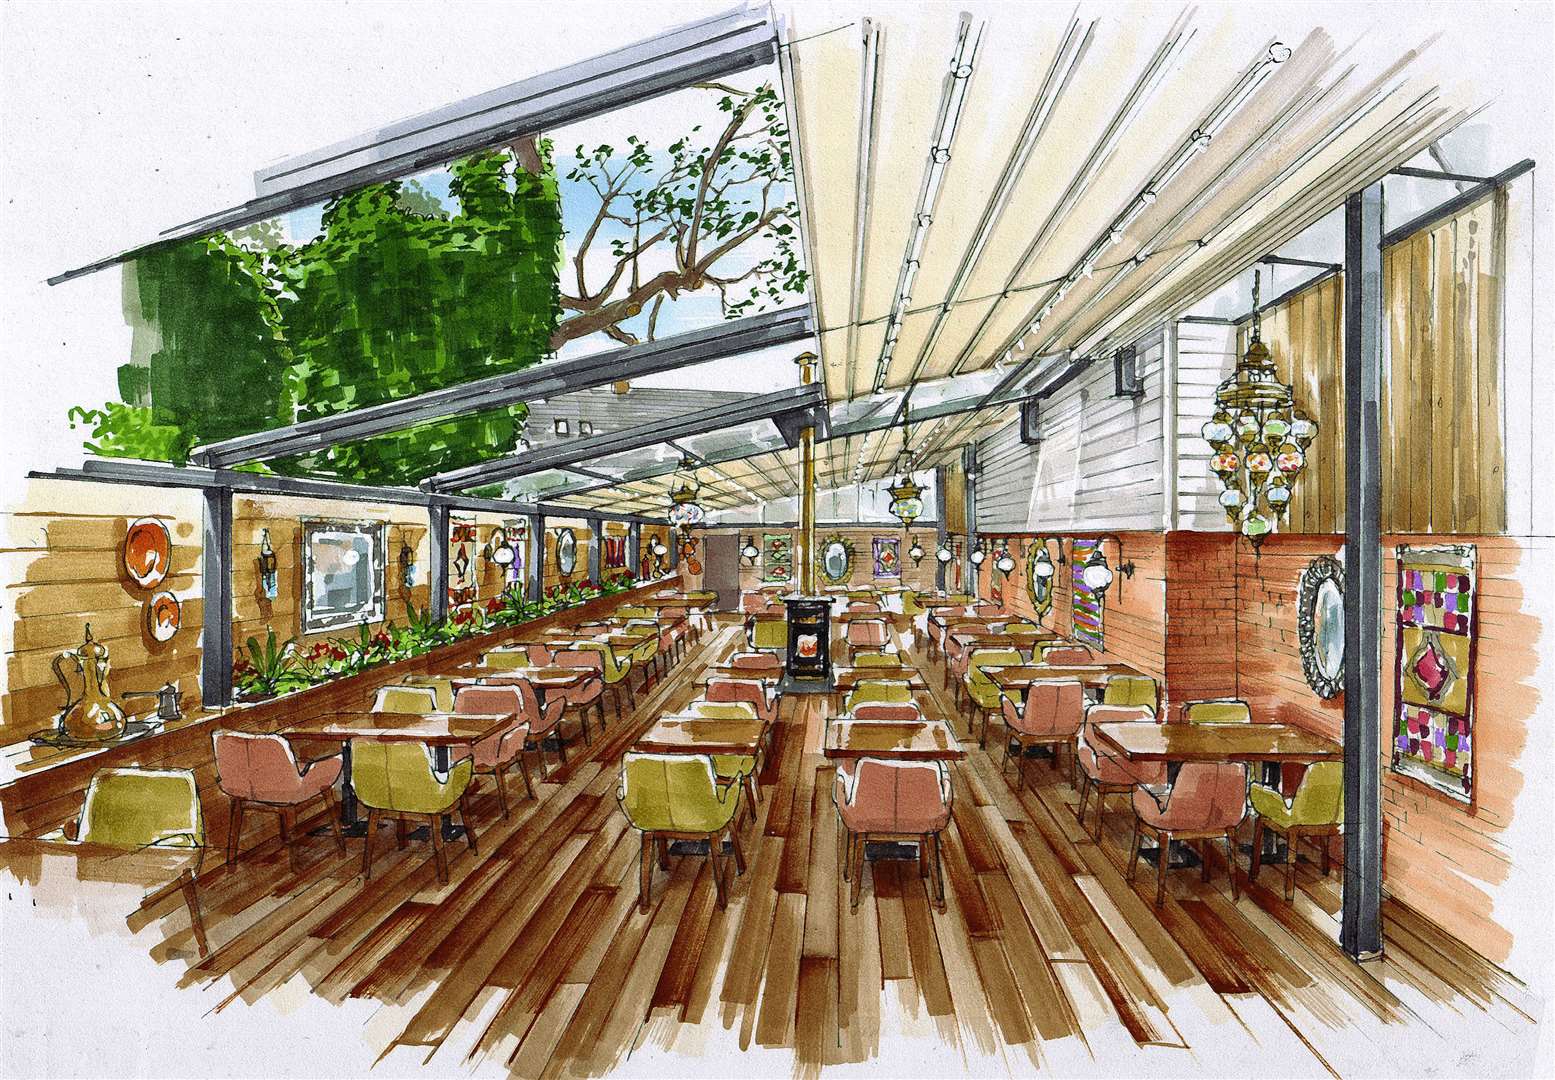 Plans for the A La Turka restaurant in Whitstable. Picture: A La Turka